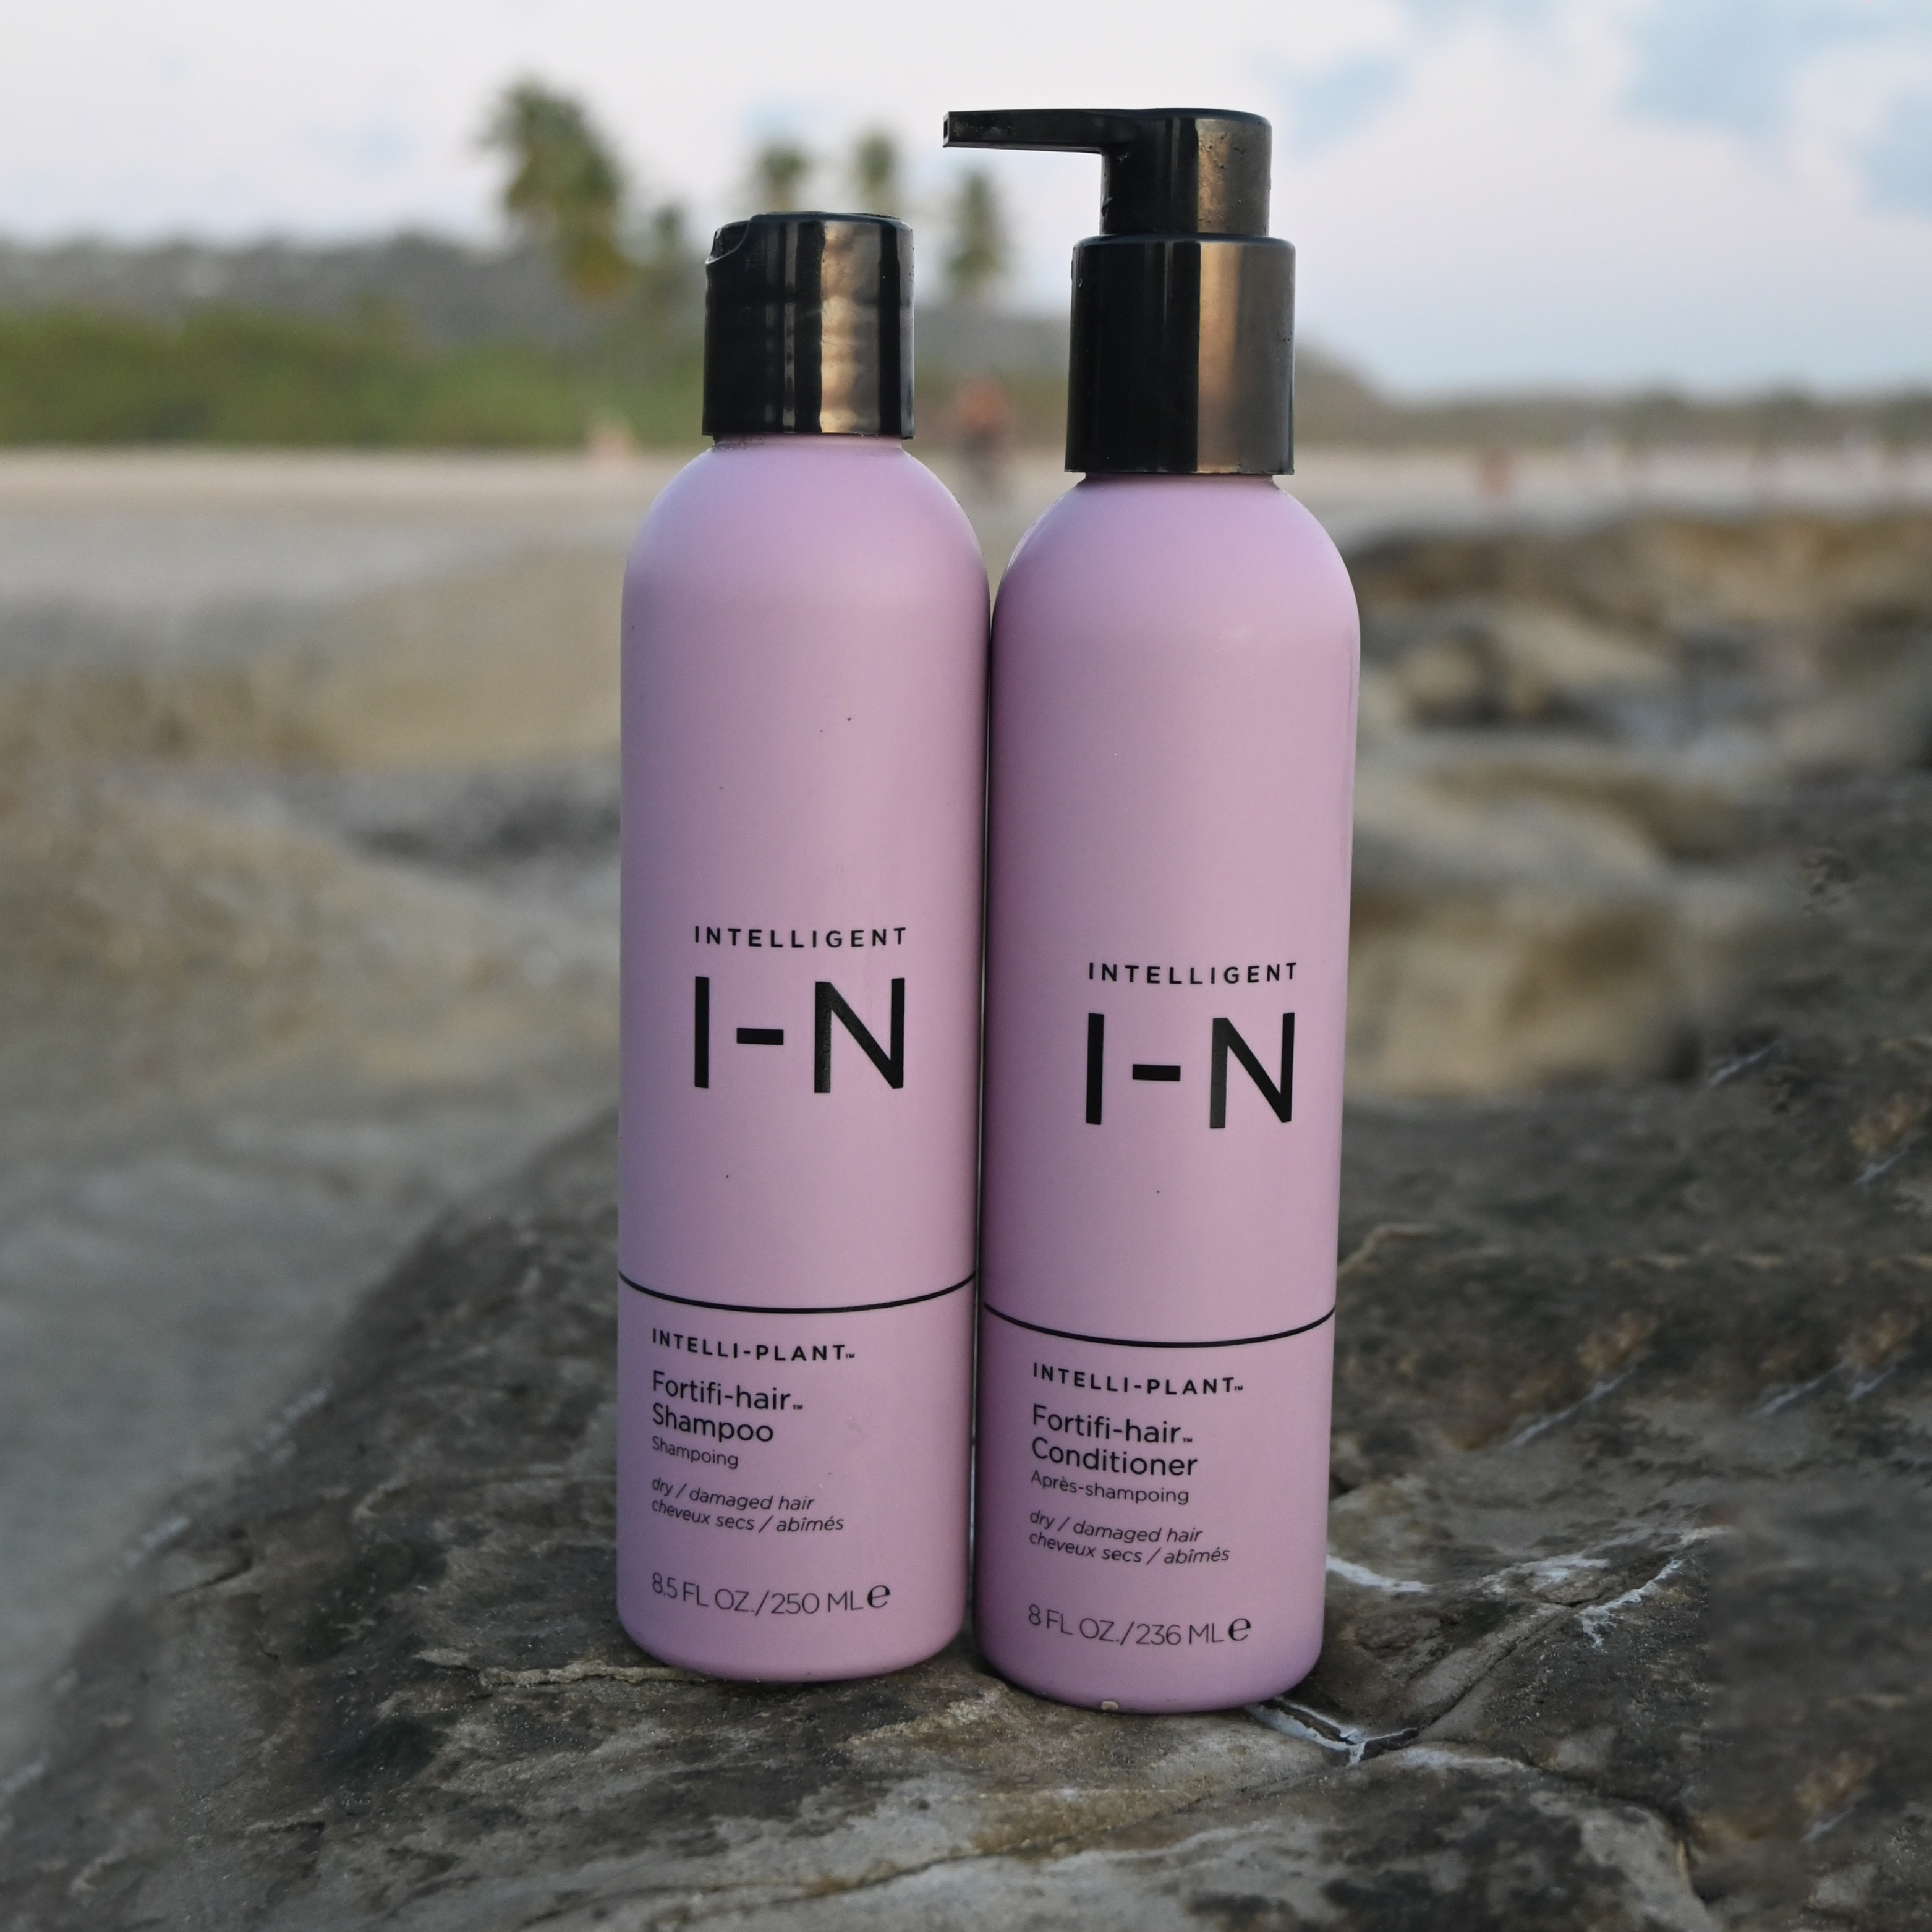 Fortifi-hair Best Plant Based Shampoo and Conditioner